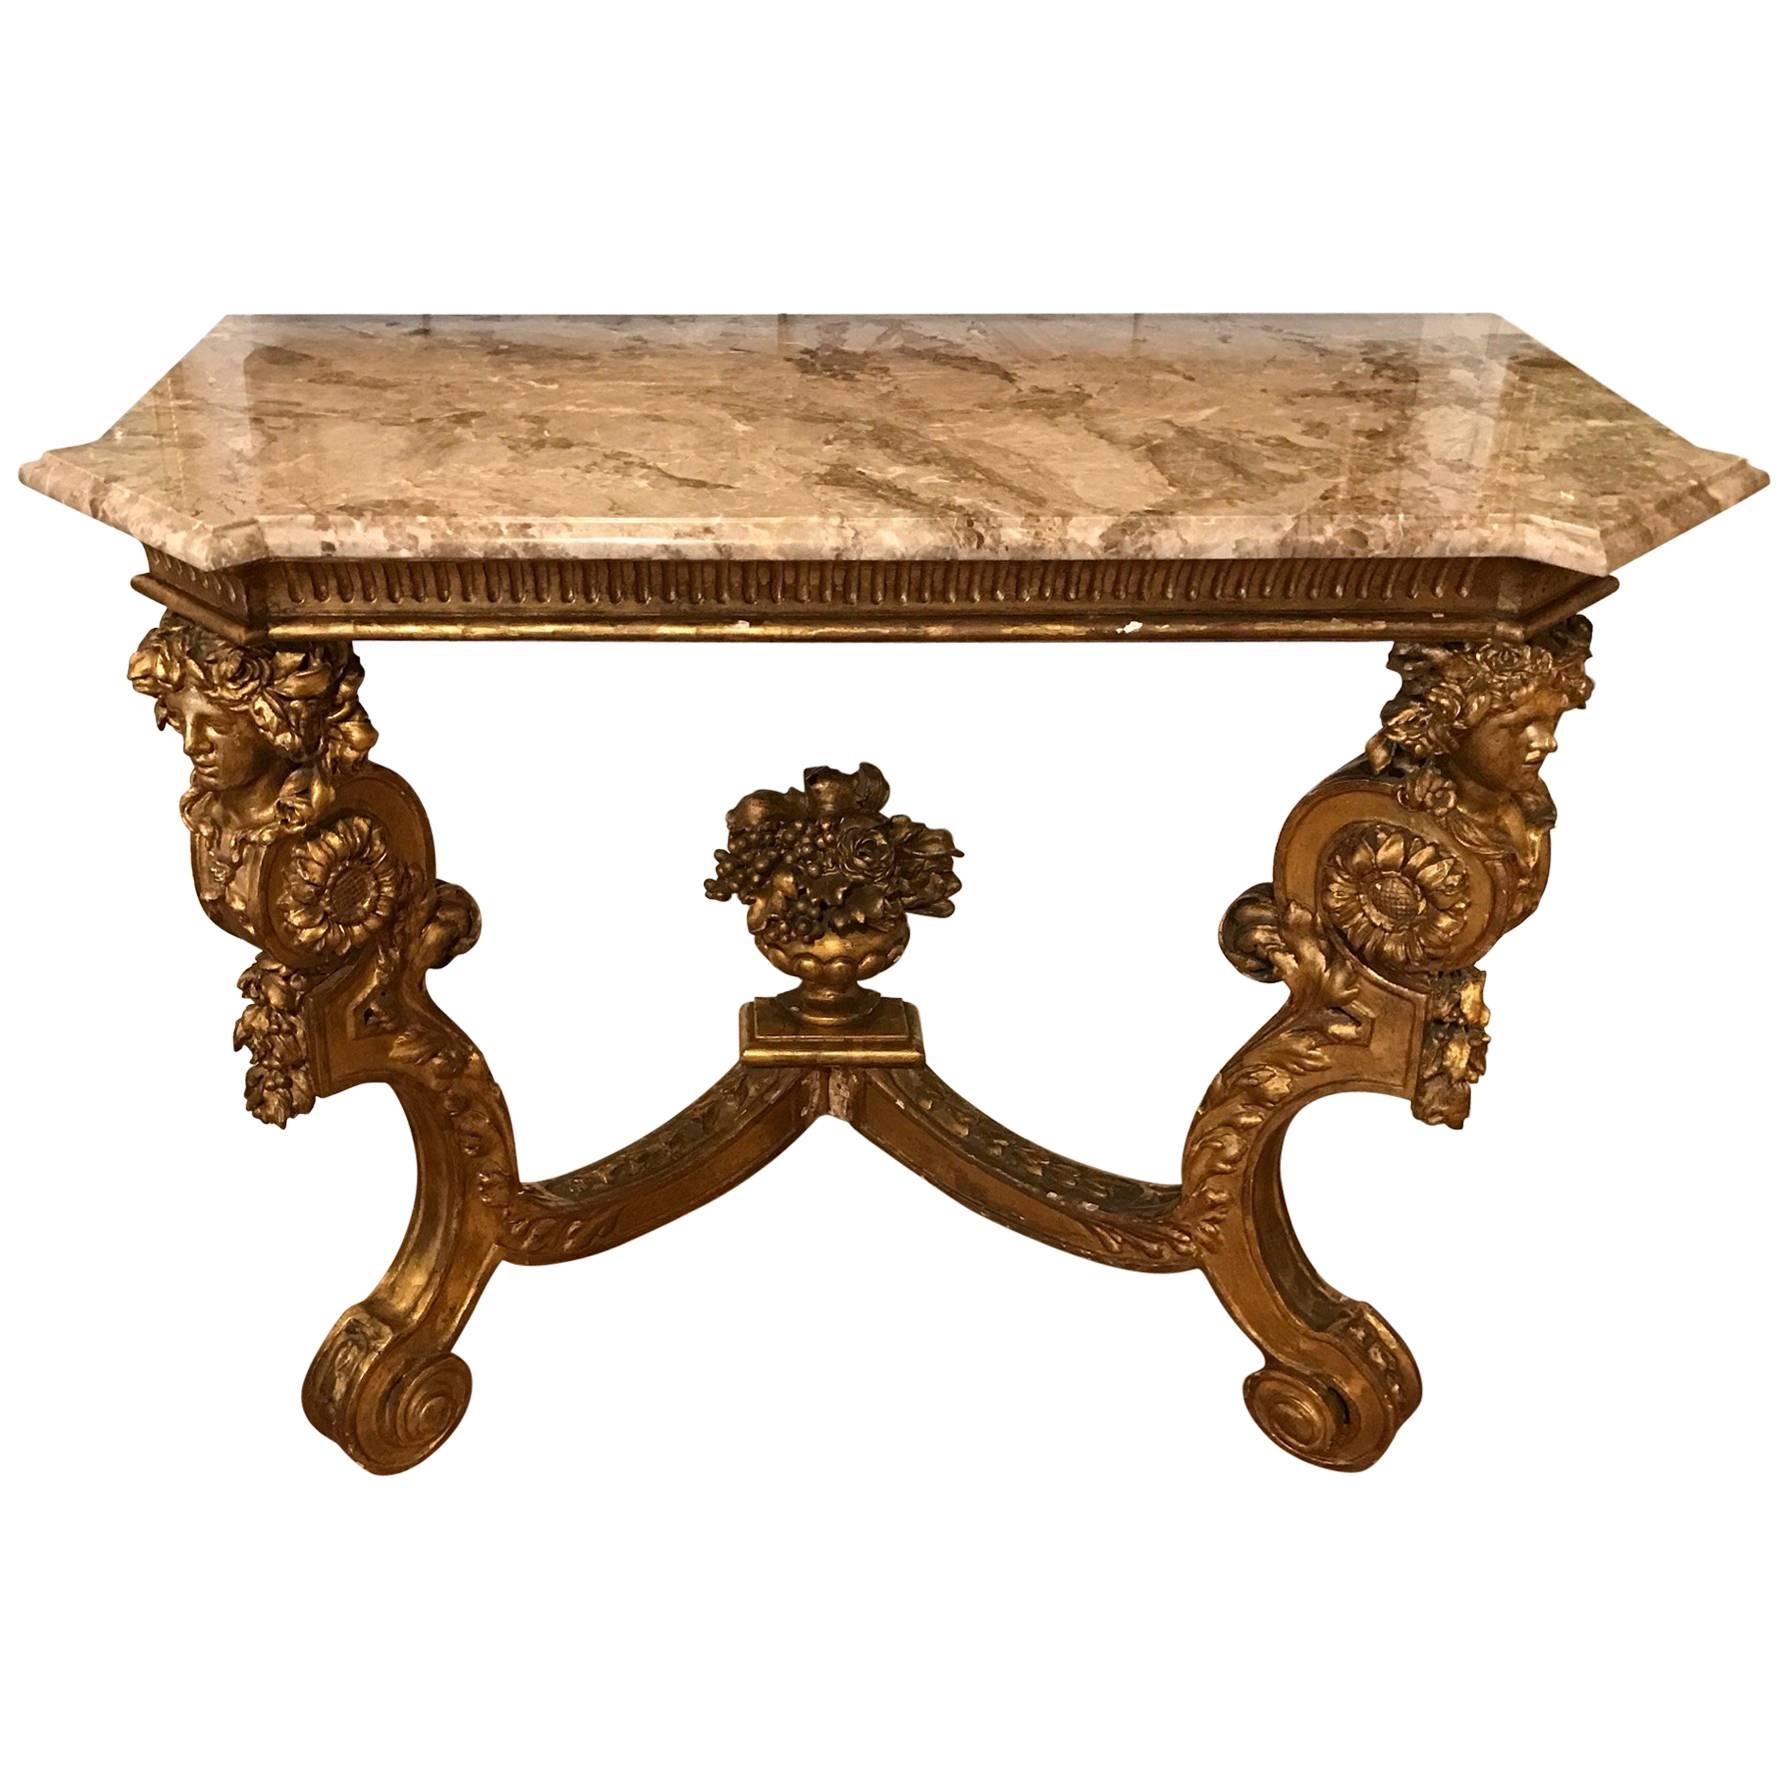 Magnificent Giltwood and Marble Louis XIV Style Console Table